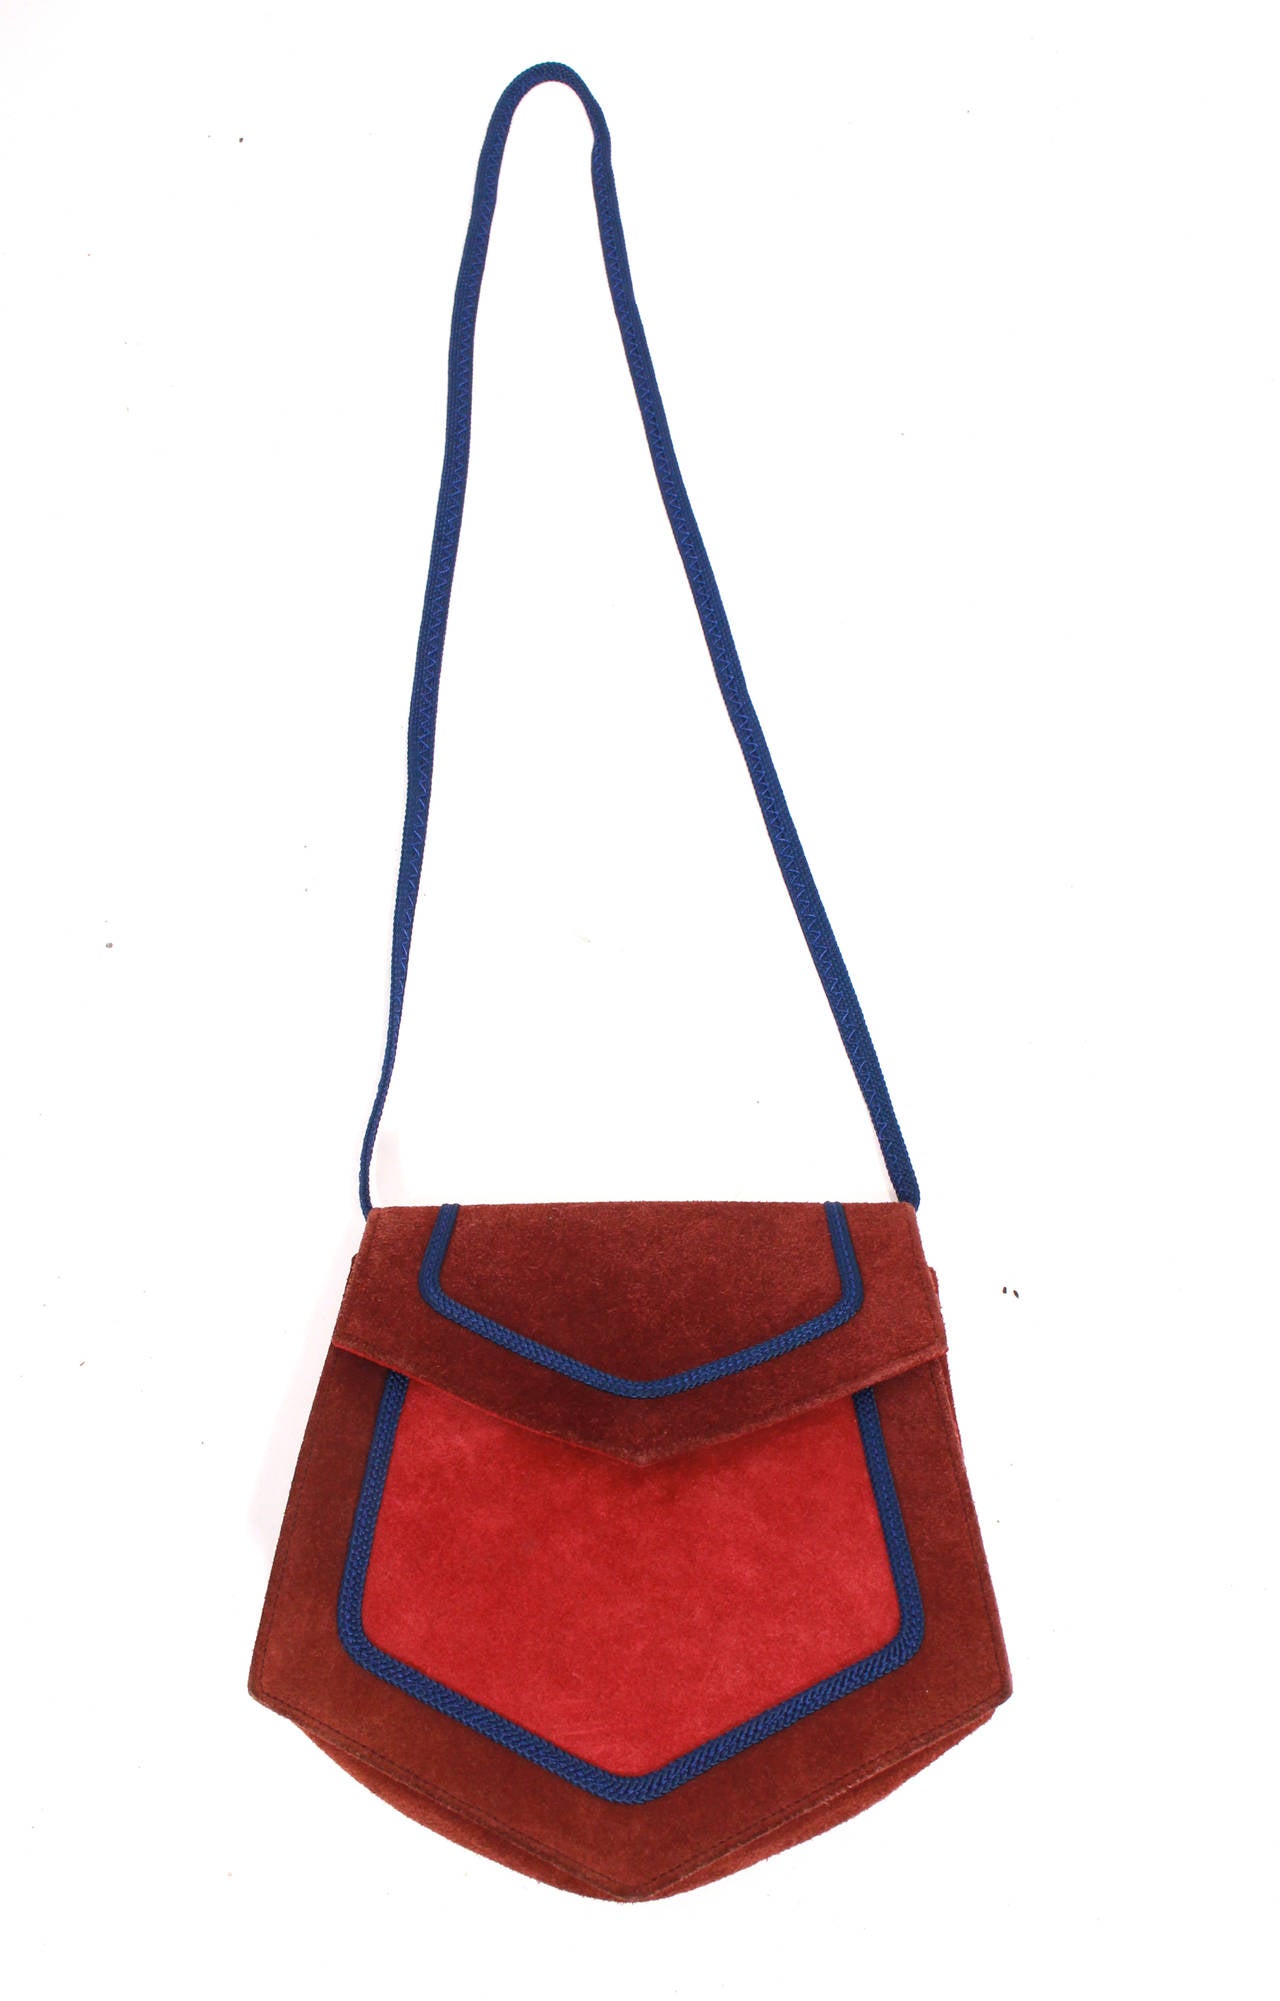 Yves Saint Laurent 1970's multi colored suede bag. Outlined in blue piping/ribbon. The perfect 70's accessory this spring!